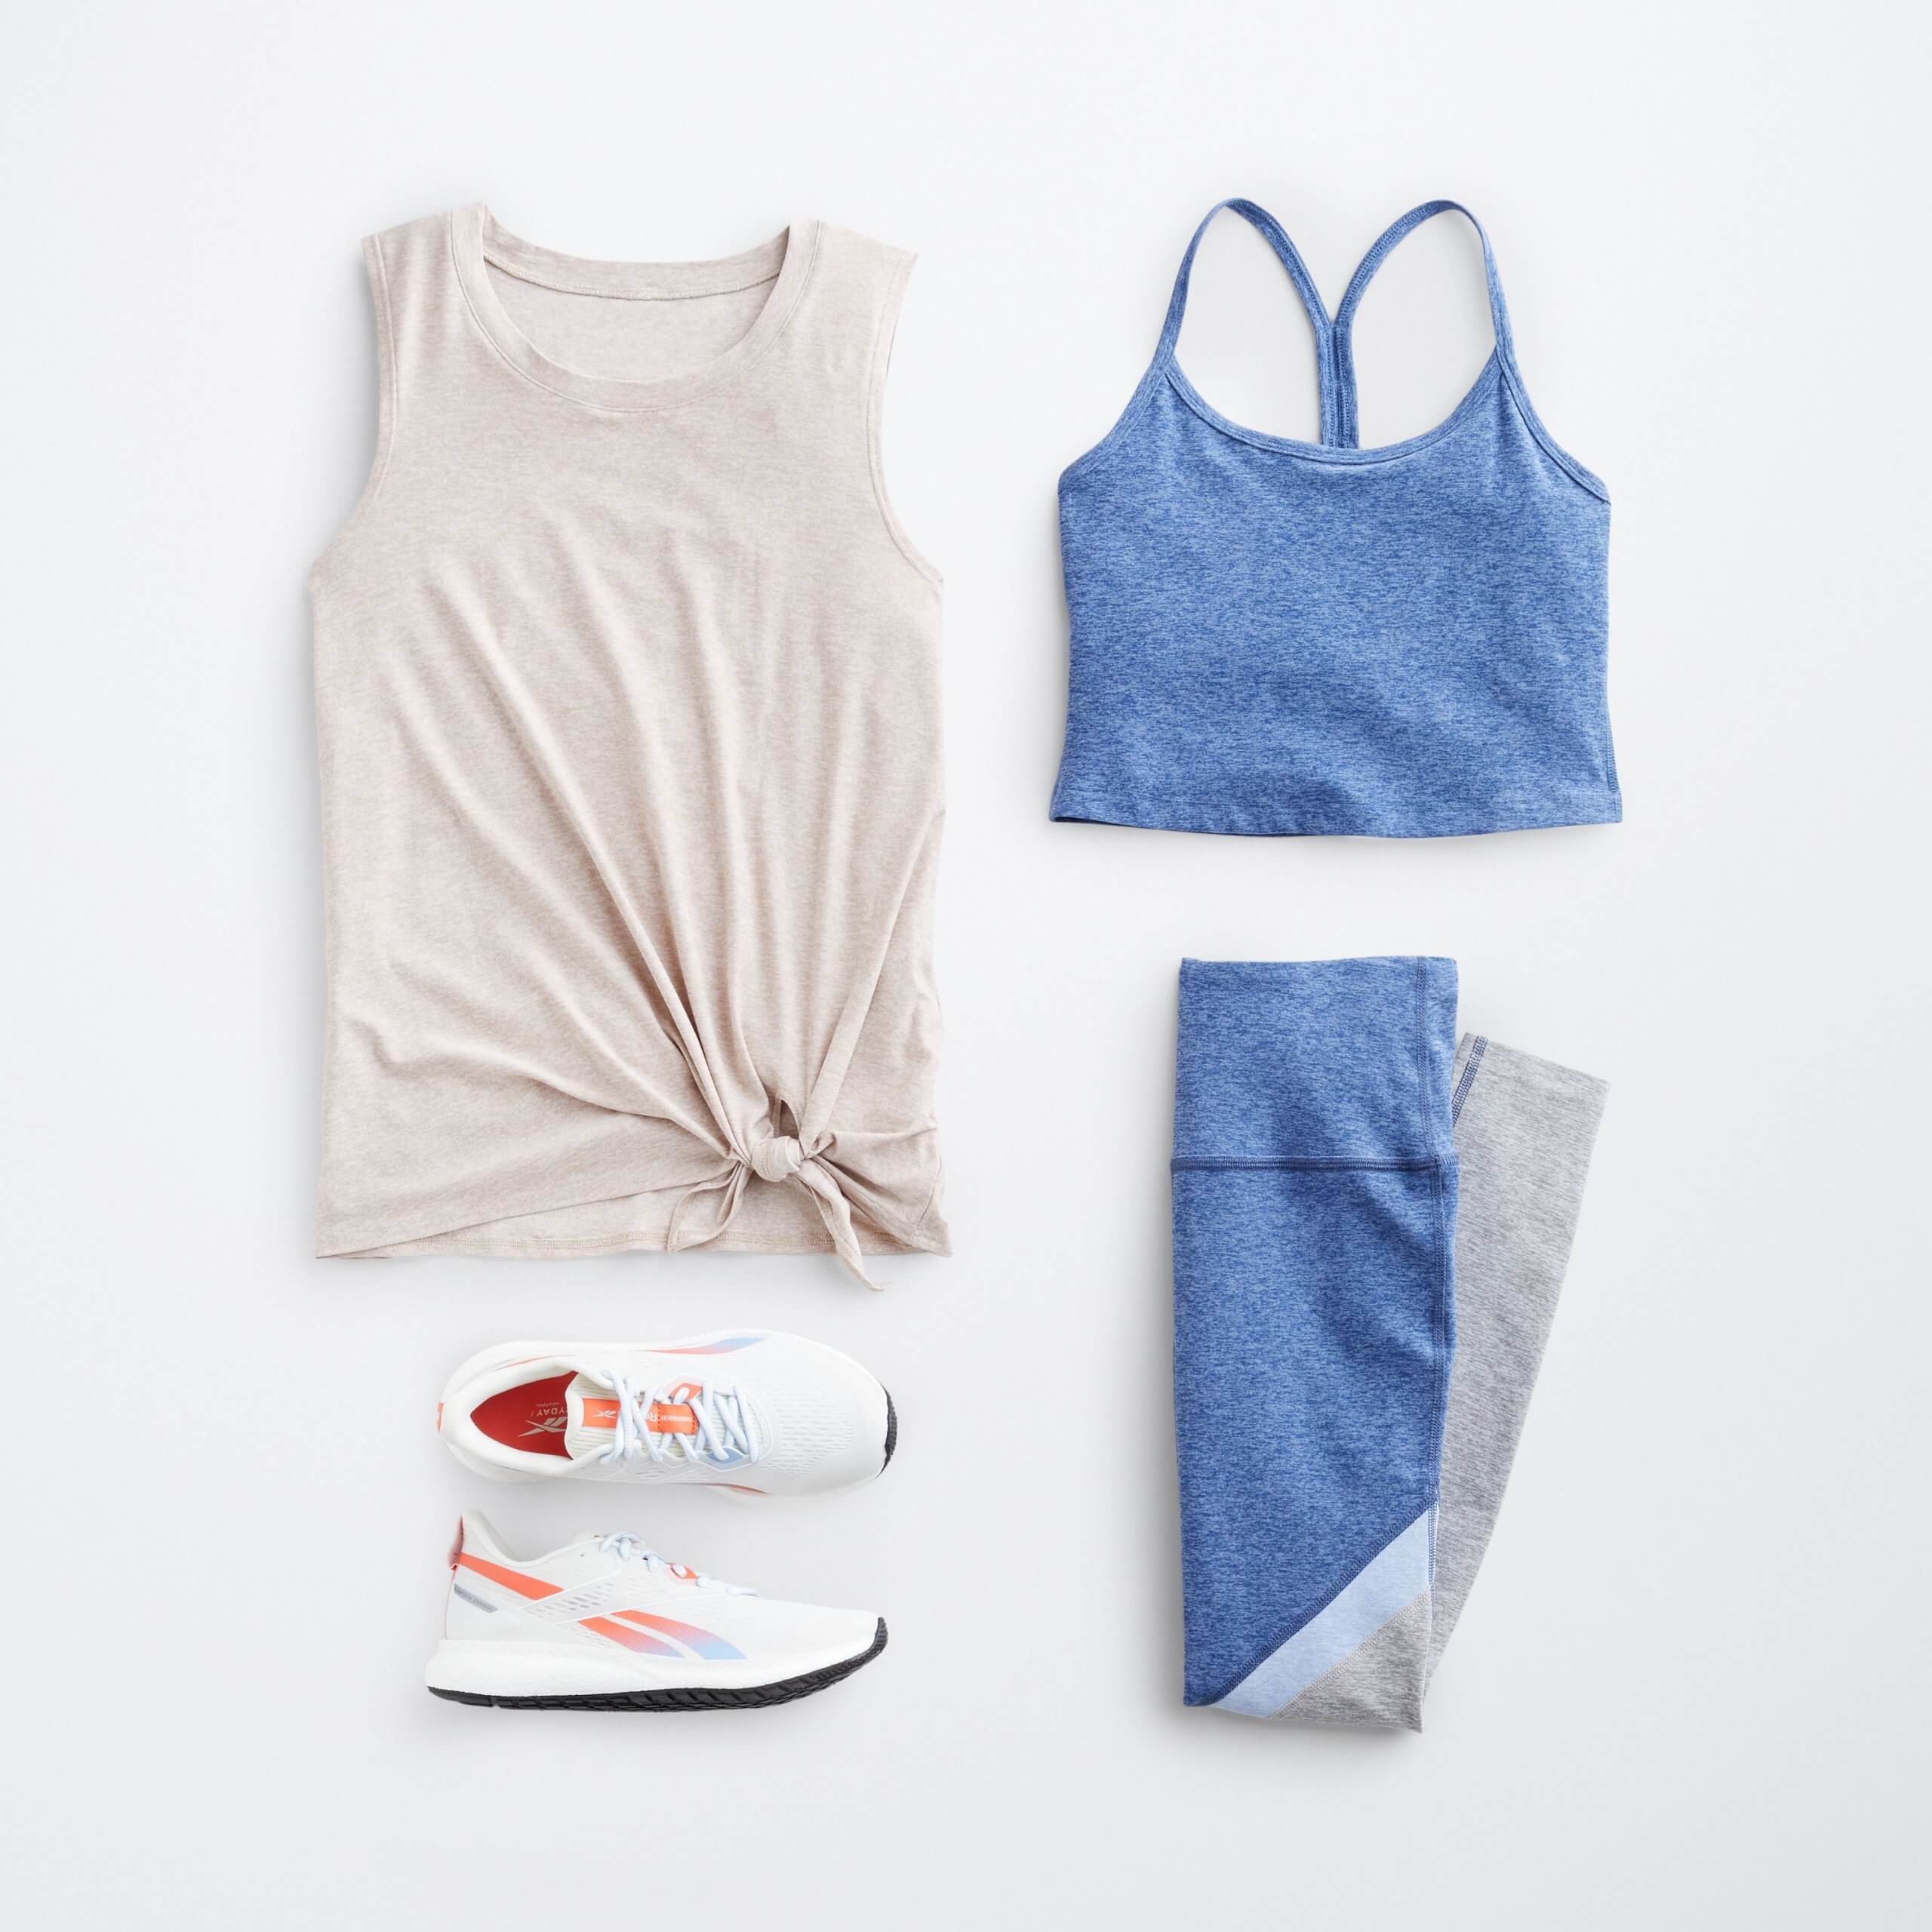 Stitch Fix Women’s outfit laydown of off-white tank-top with tie front, blue cropped sports top, blue and grey leggings and white sneakers with orange details.